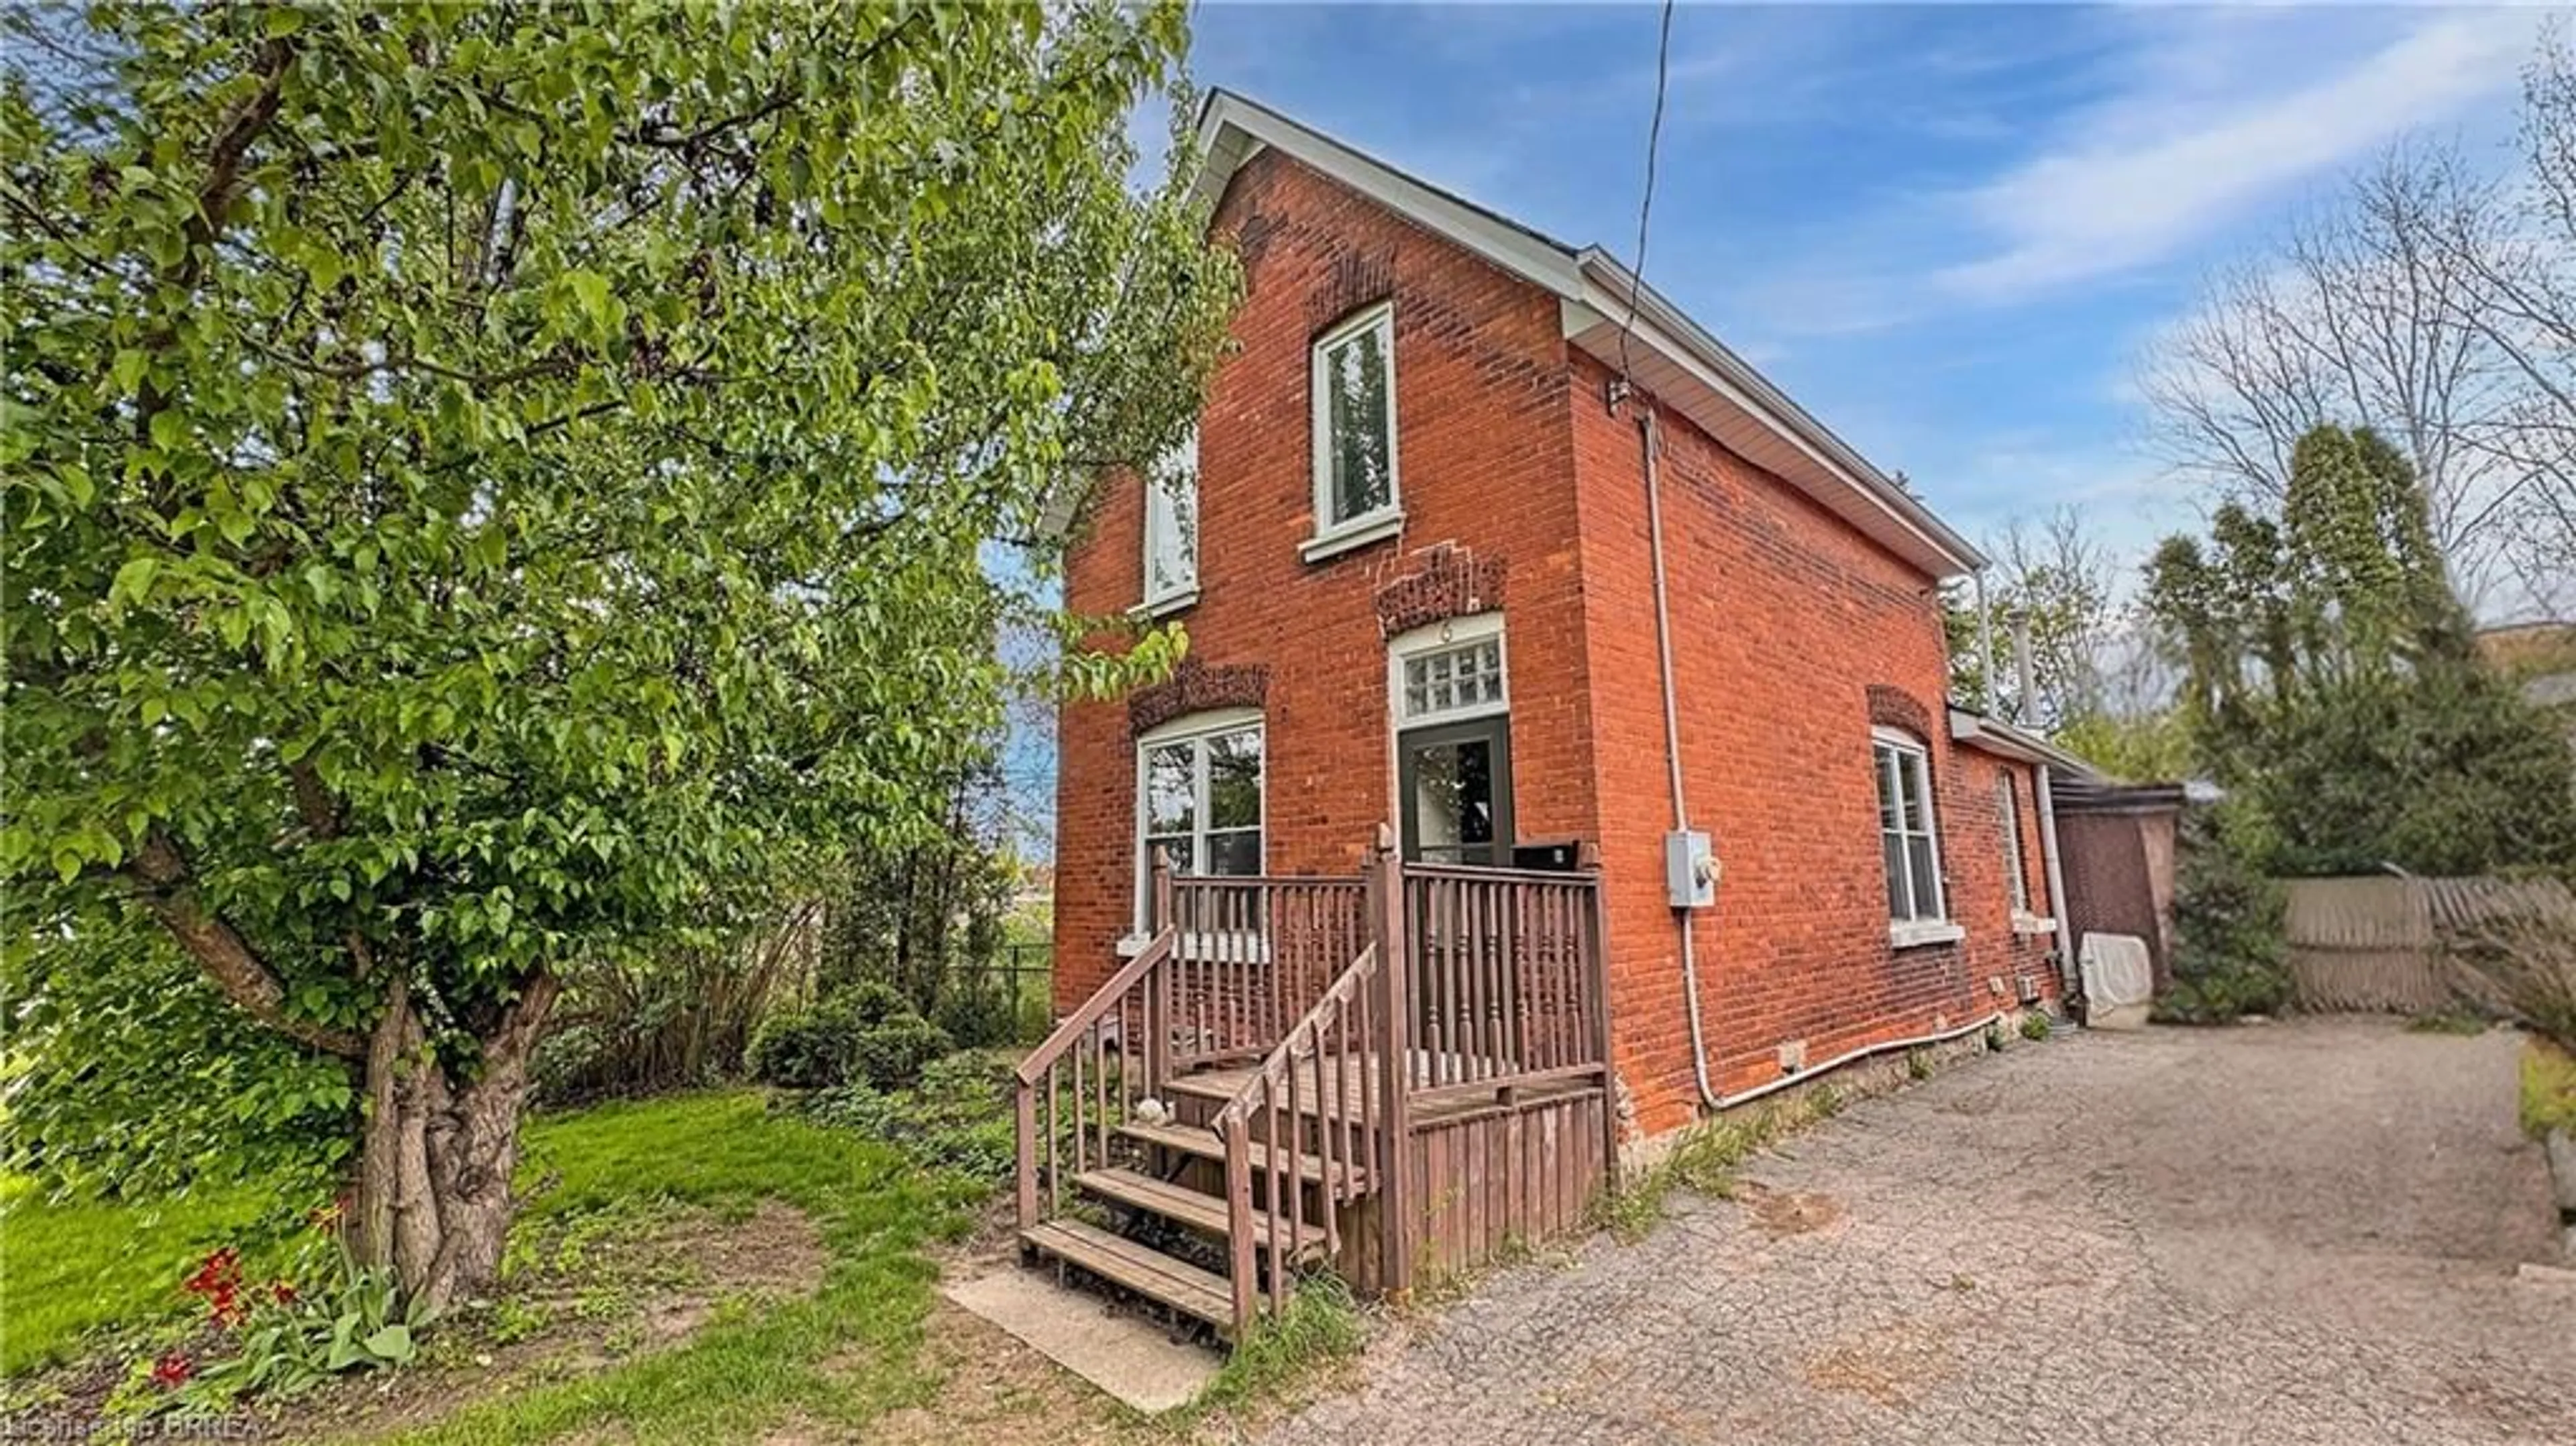 Cottage for 6 Canning St, Brantford Ontario N3T 1P1